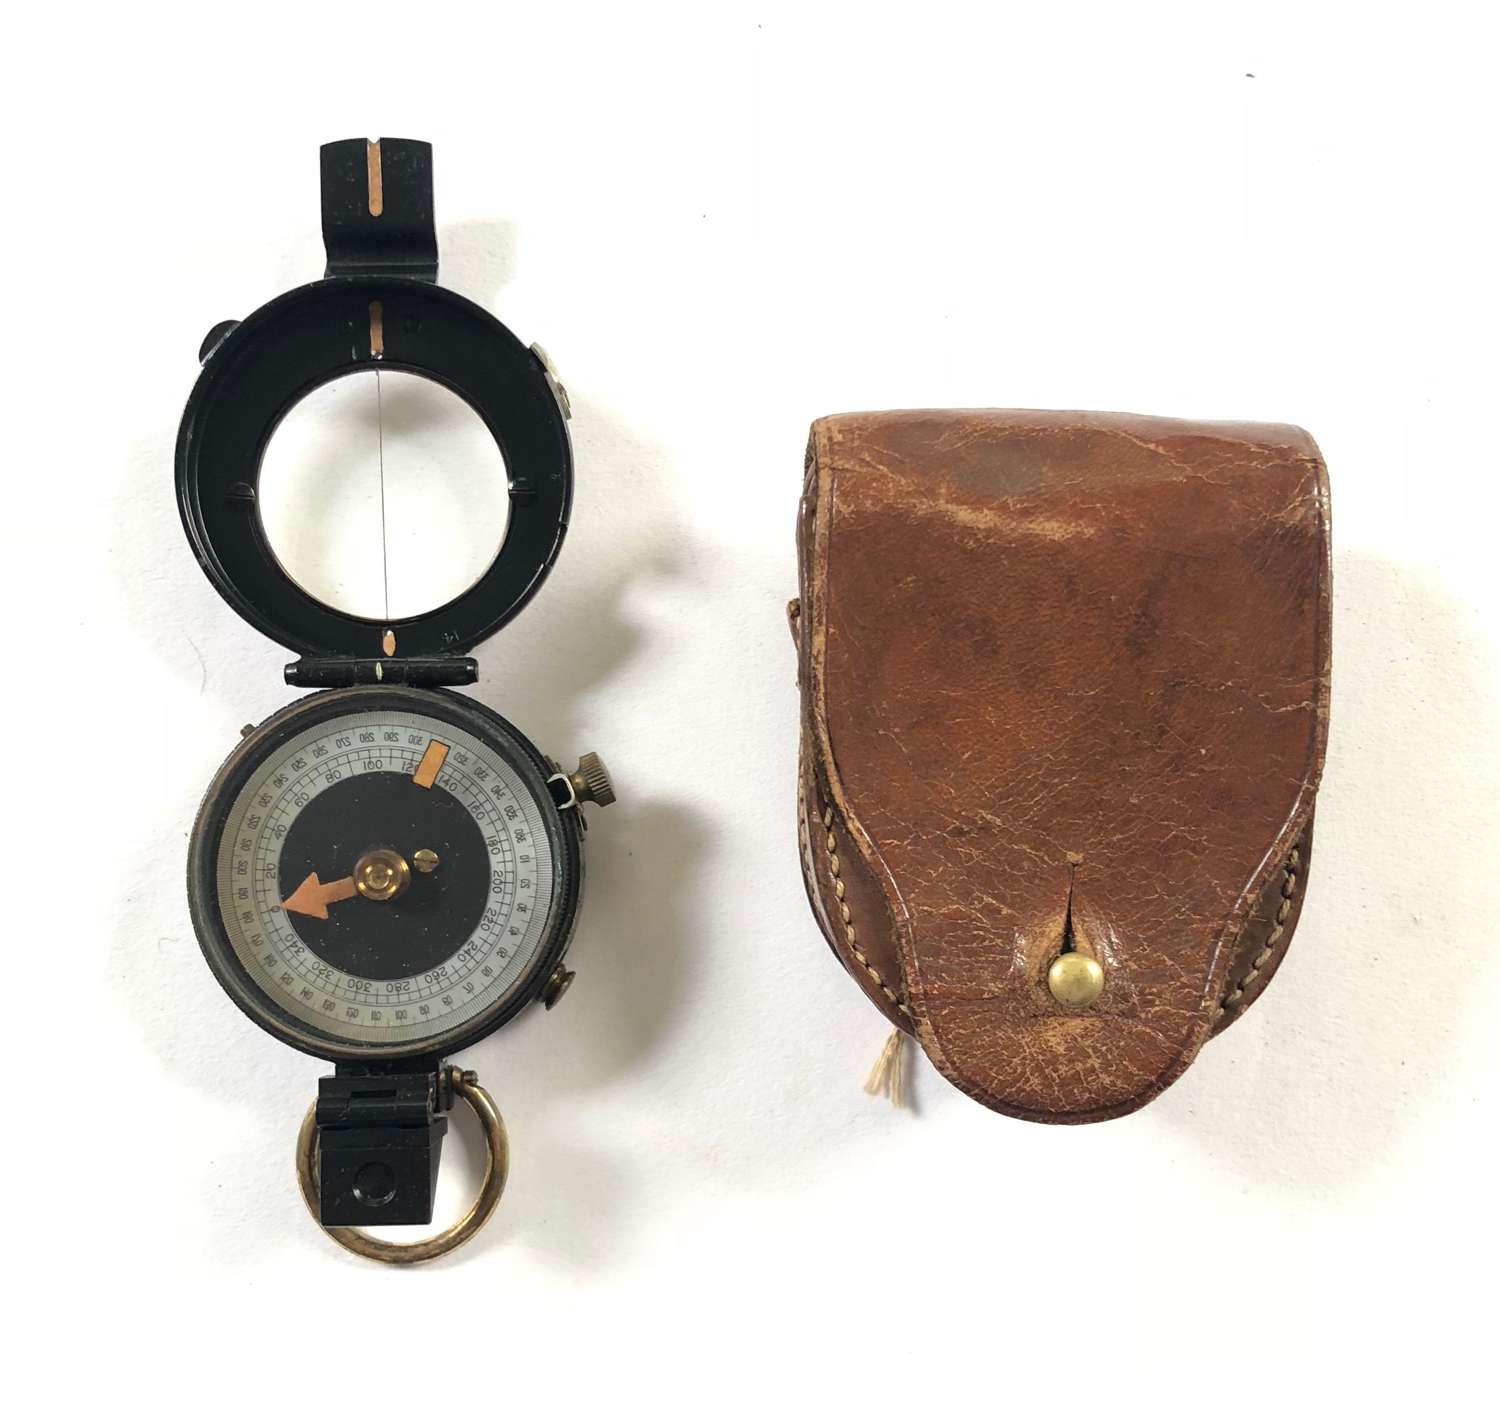 WW1 British Officer’s Field Marching Compass.